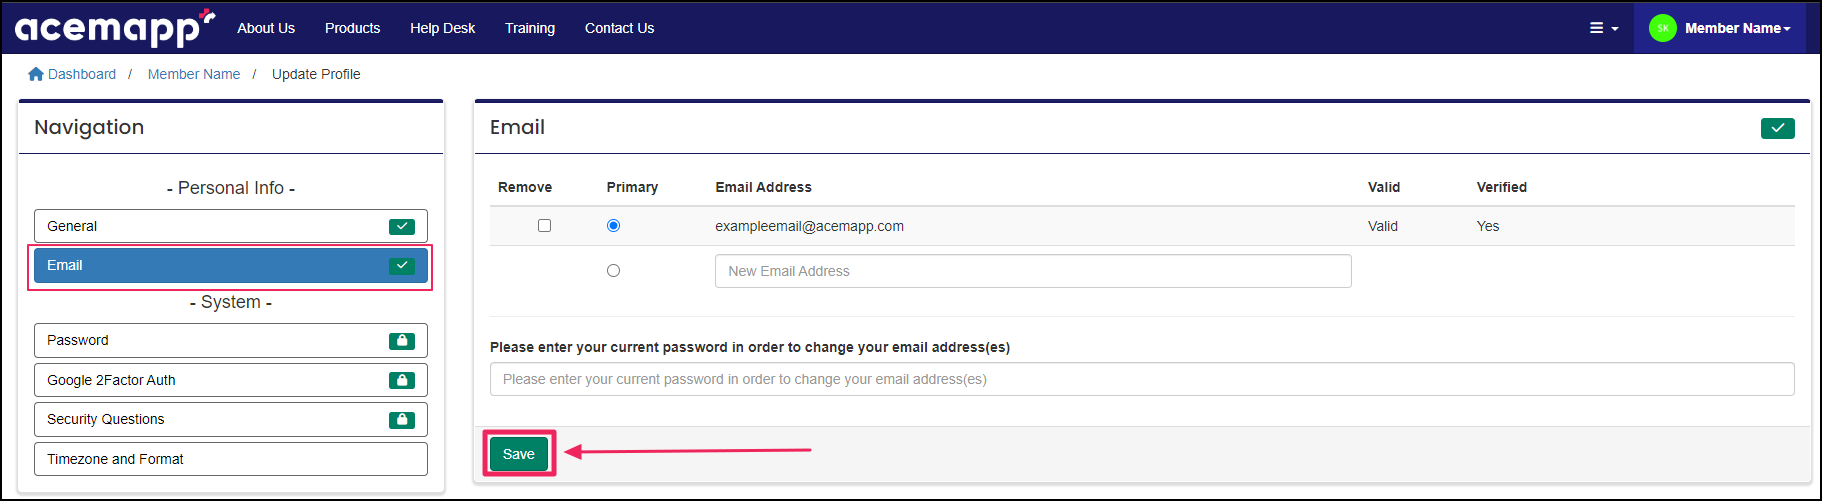 Page to update email address showing fields for email address and save button.